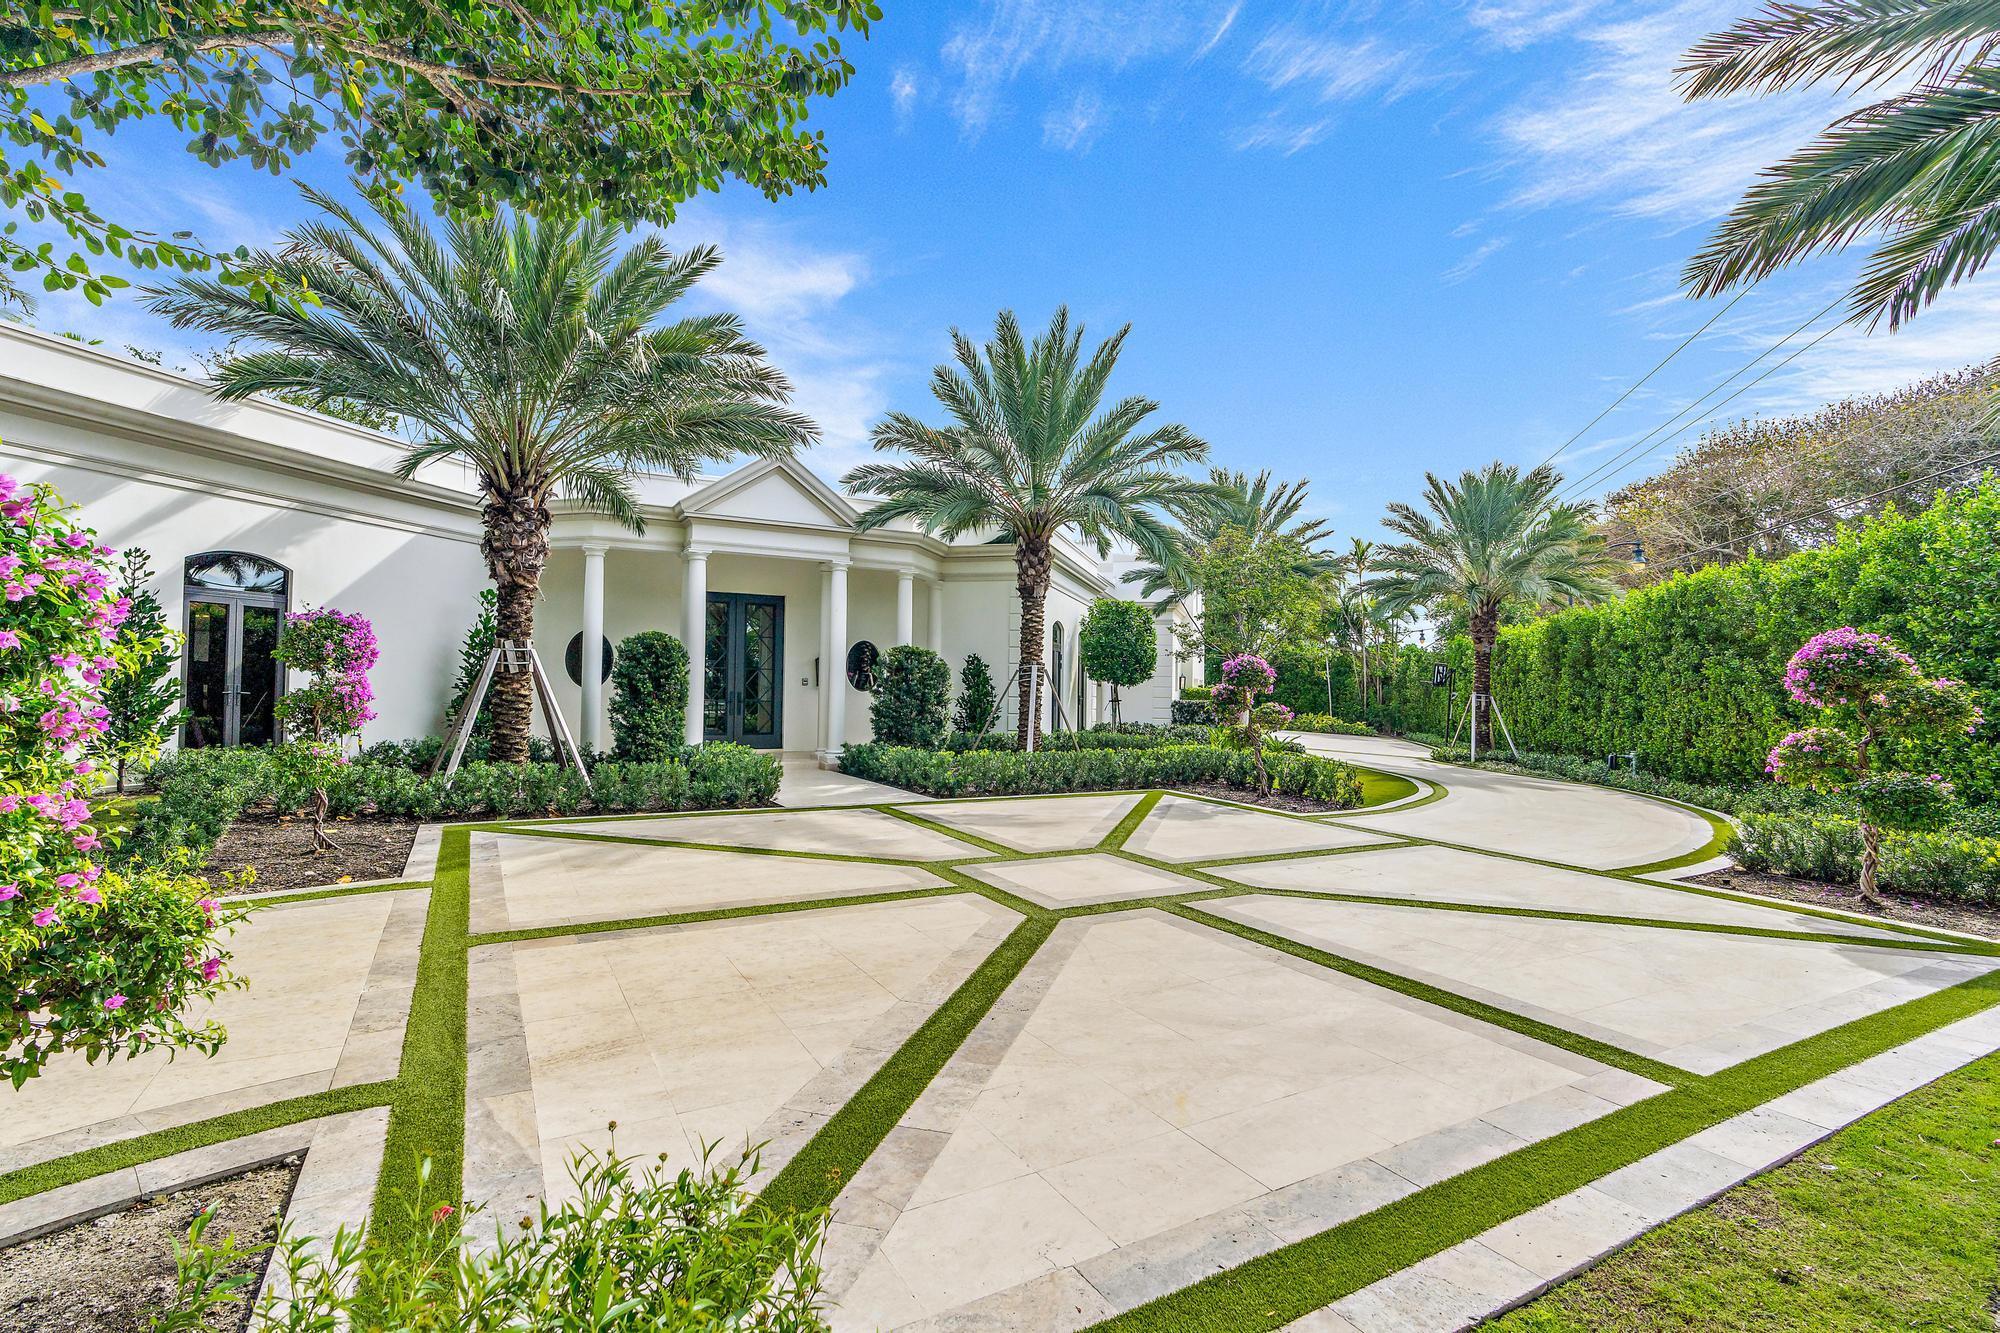 Step into this completely reimagined regency estate in the coveted Estate Section of Palm Beach. With close private deeded access to a pristine beach and just moments away from the renowned Worth Avenue and an array of exceptional shops and restaurants, this stunning home is in an exceptional location. Upon entering, you are immediately greeted by the grandeur of high ceilings, clean lines, and an abundance of natural light streaming through the large windows. With 7 bedrooms (2 of which are currently being used as a gym and a den) as well as a separate office, this residence provides a versatile floor plan to accommodate your lifestyle needs The seamless transition from the interior to the exterior leads to a breathtaking backyard oasis, complete with a sparkling pool, spa, and lush landscaping, offering a private, serene retreat for relaxation and entertainment.

This exceptional contemporary residence presents a unique opportunity to immerse yourself in the luxury and allure of Palm Beach living.

Only 10-15 minutes from PBI.

*All information is deemed reliable but is subject to errors and must be verified by Buyer.